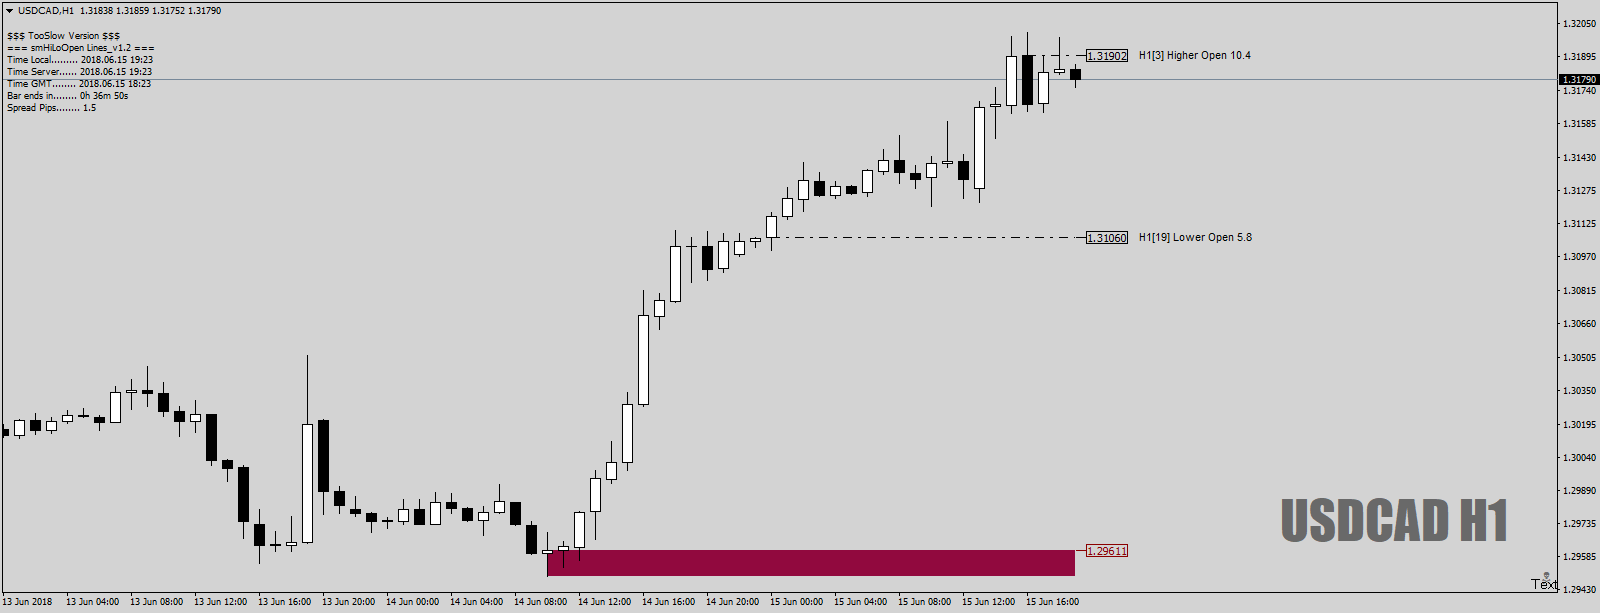 USDCADH1asegforBrett15thJune18HOLOresetentry-candles.png